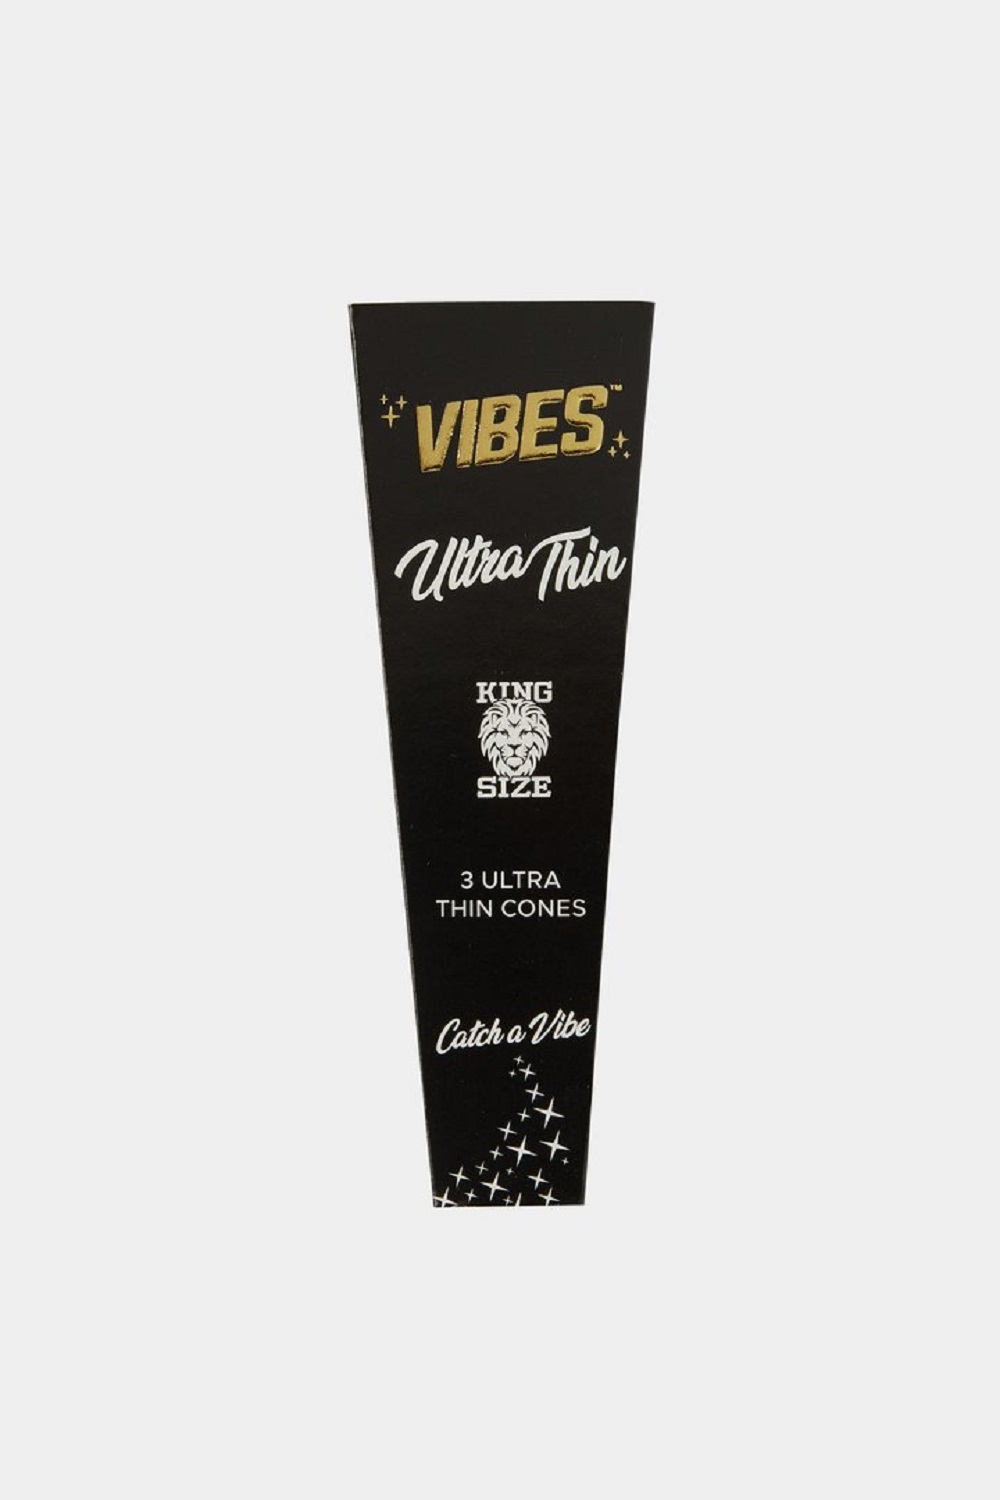 Vibes Ultra Thin King Size Cones 3 Pack